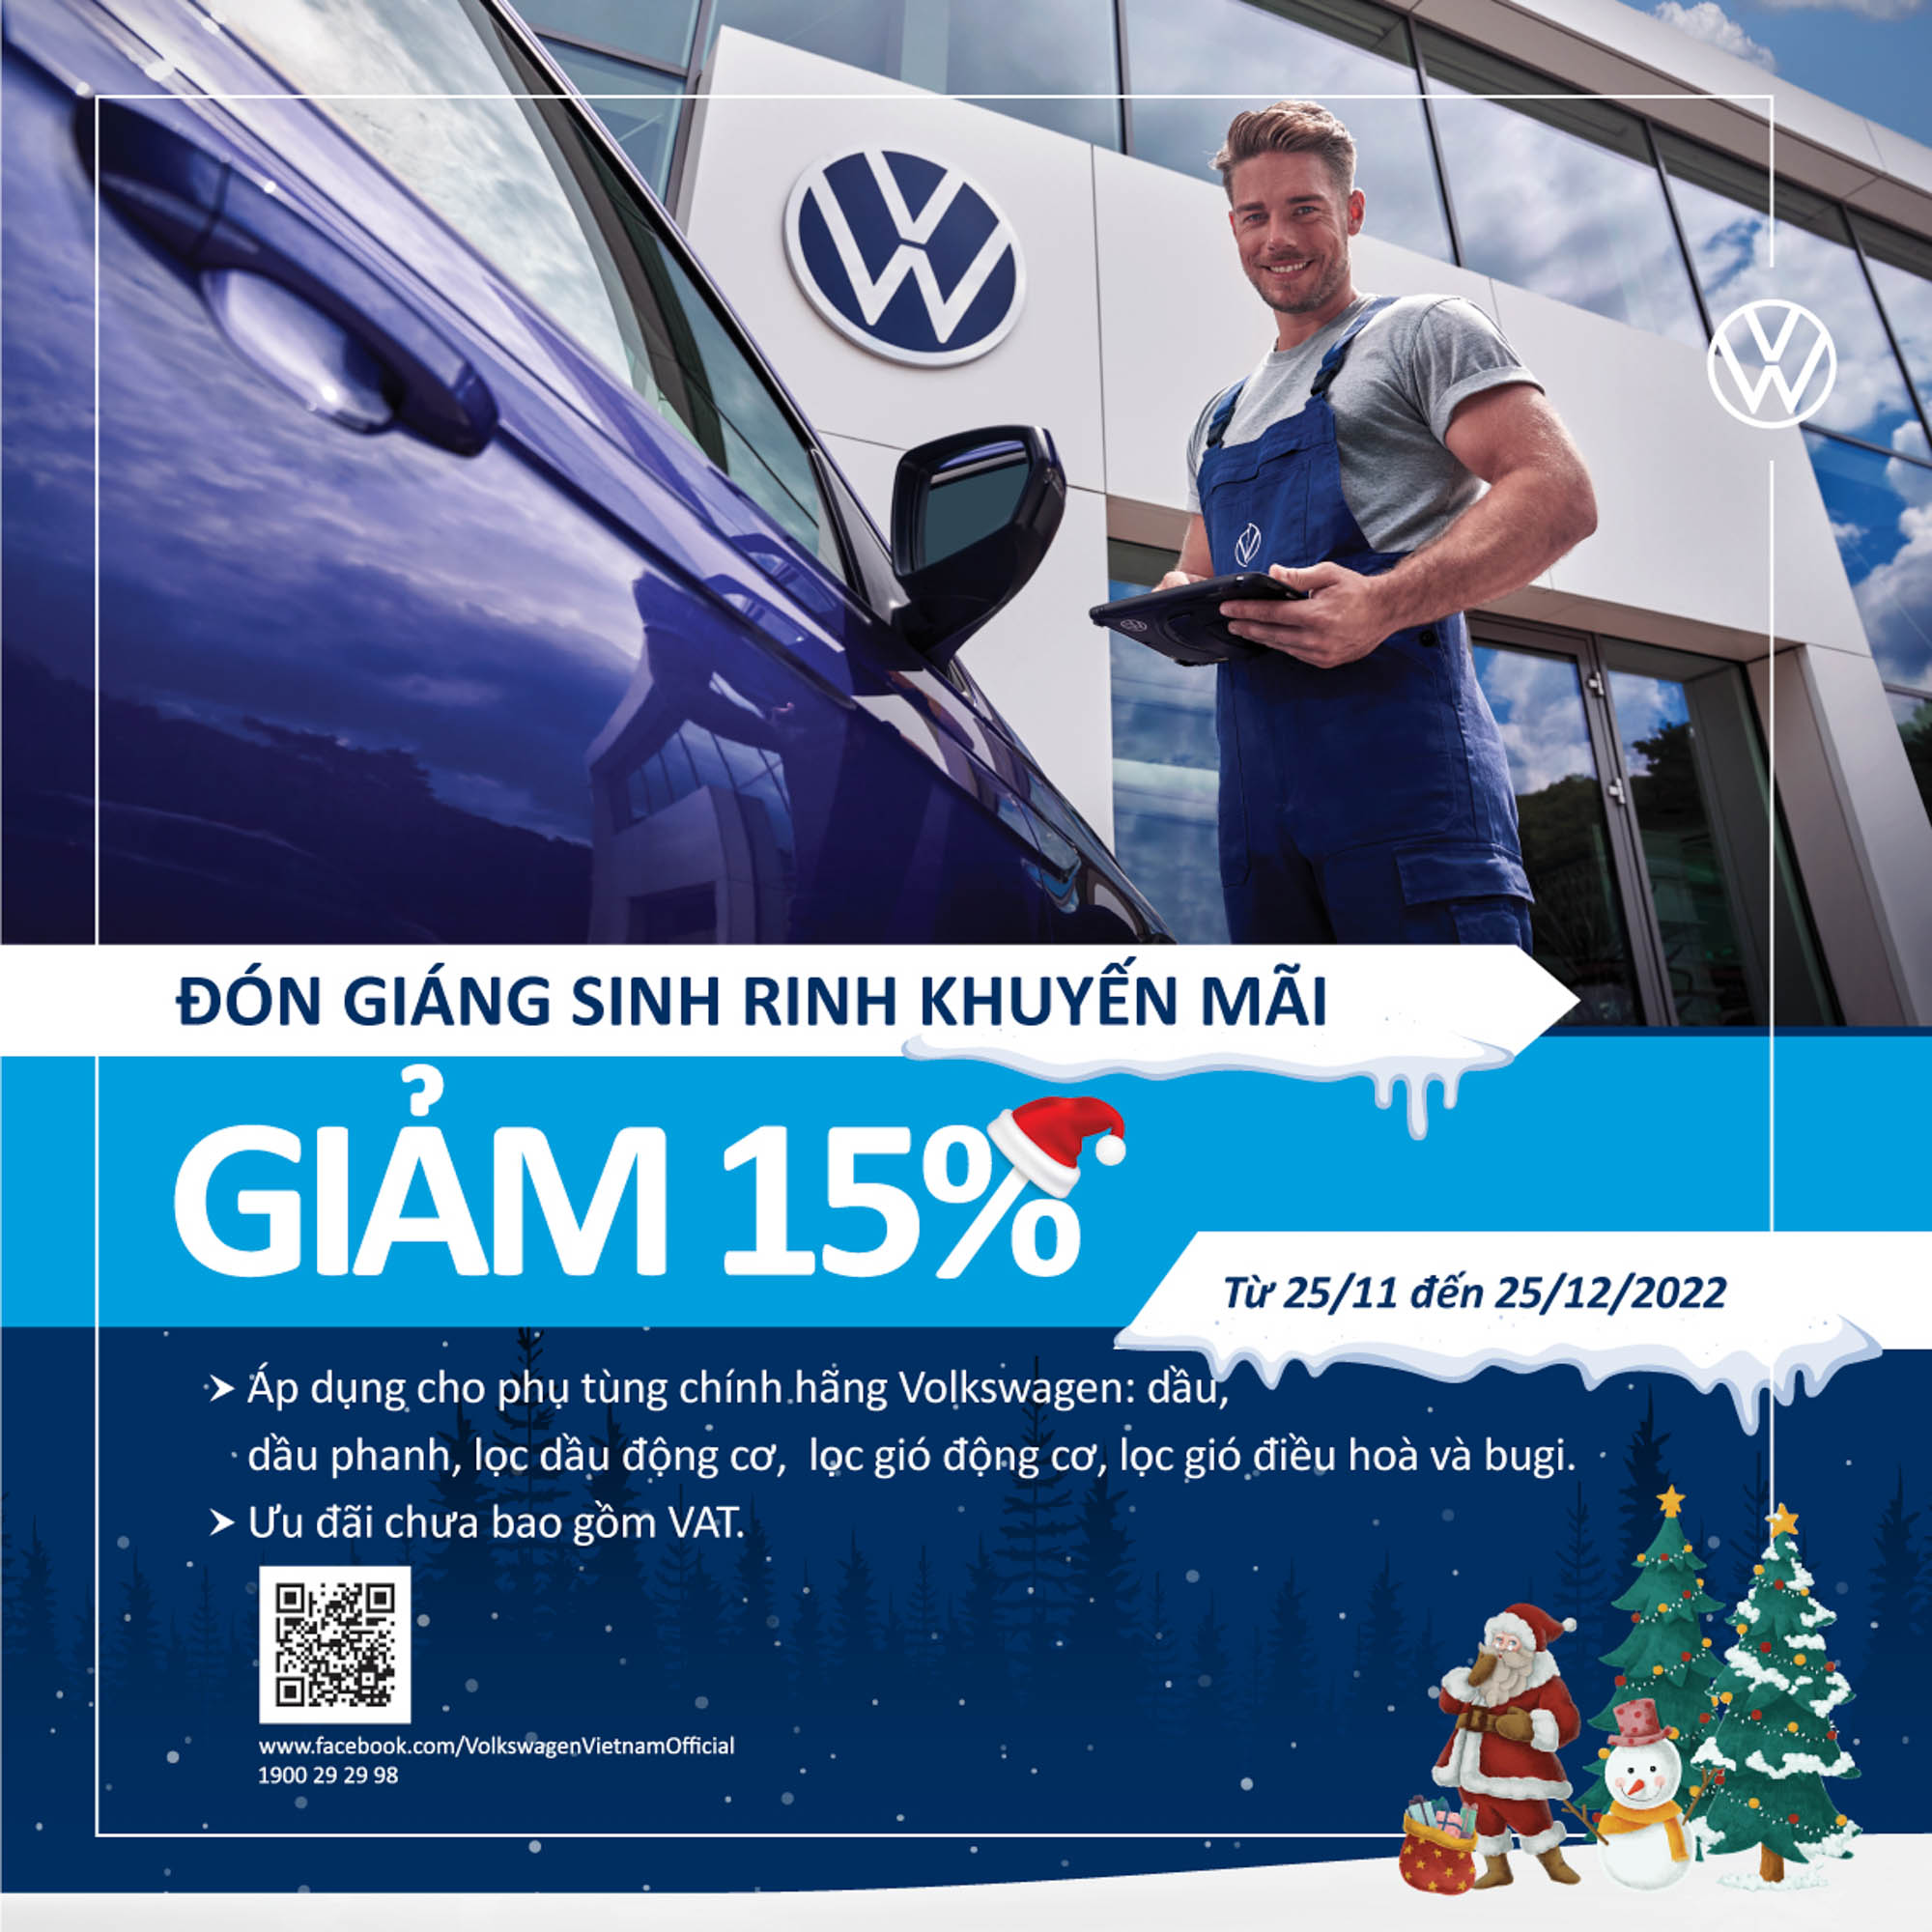 volkswagen-giam-gia-thang-12-2022-anh-.jpg